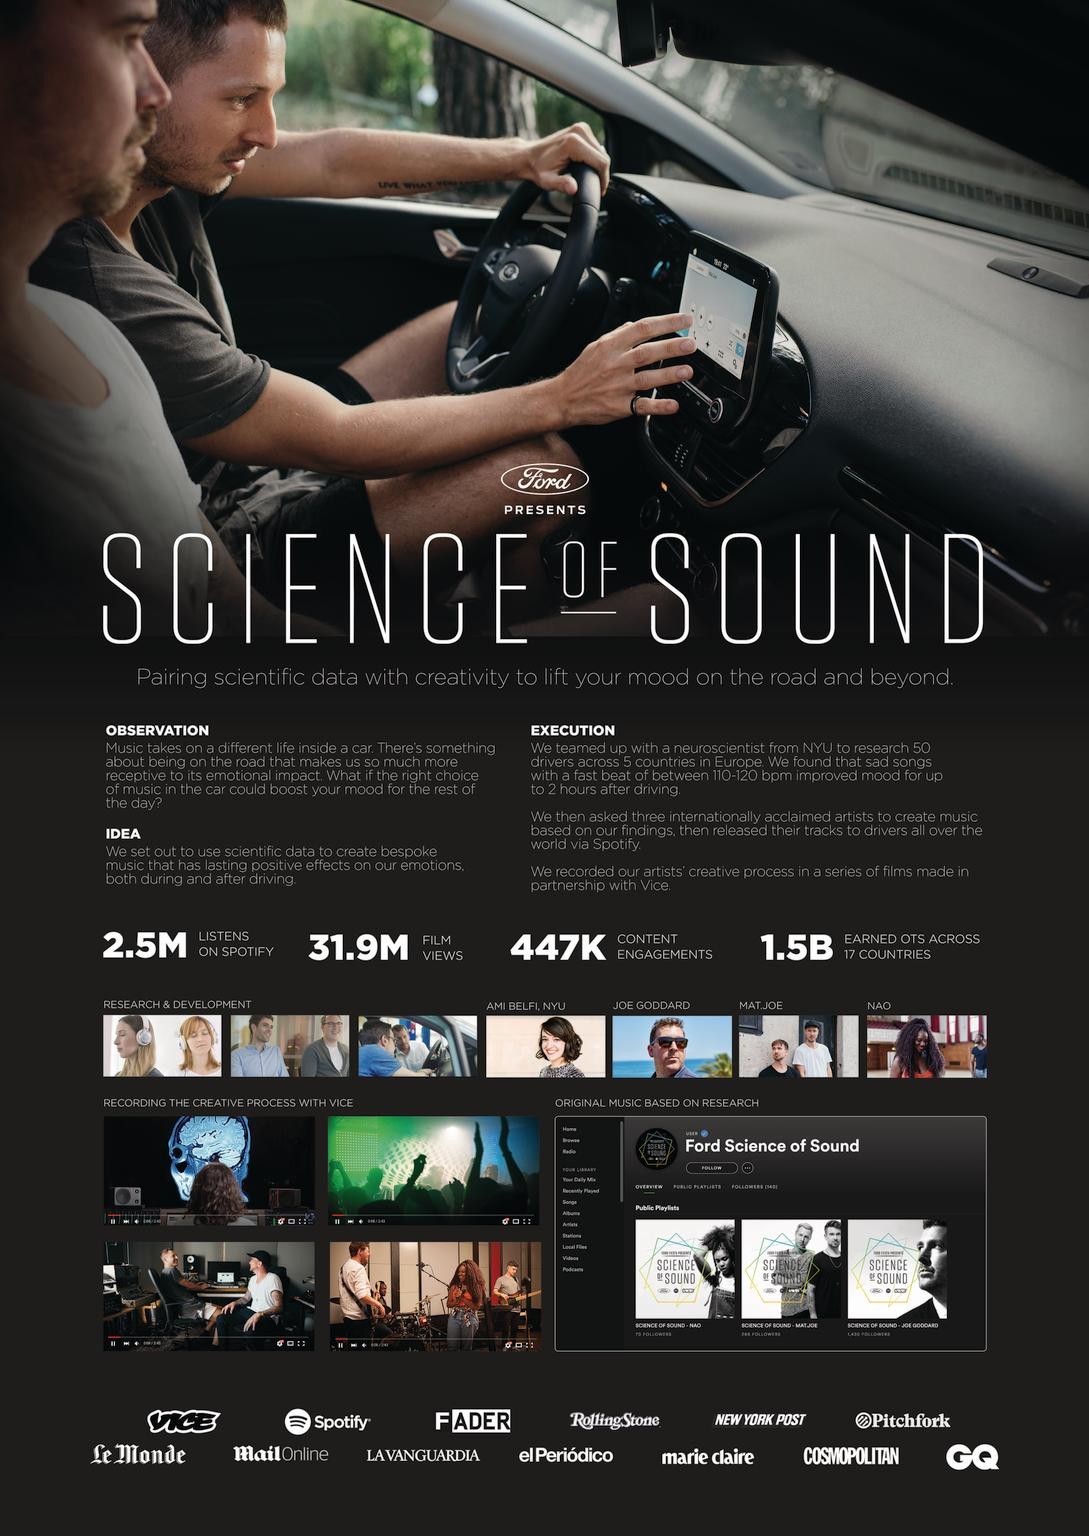 SCIENCE OF SOUND